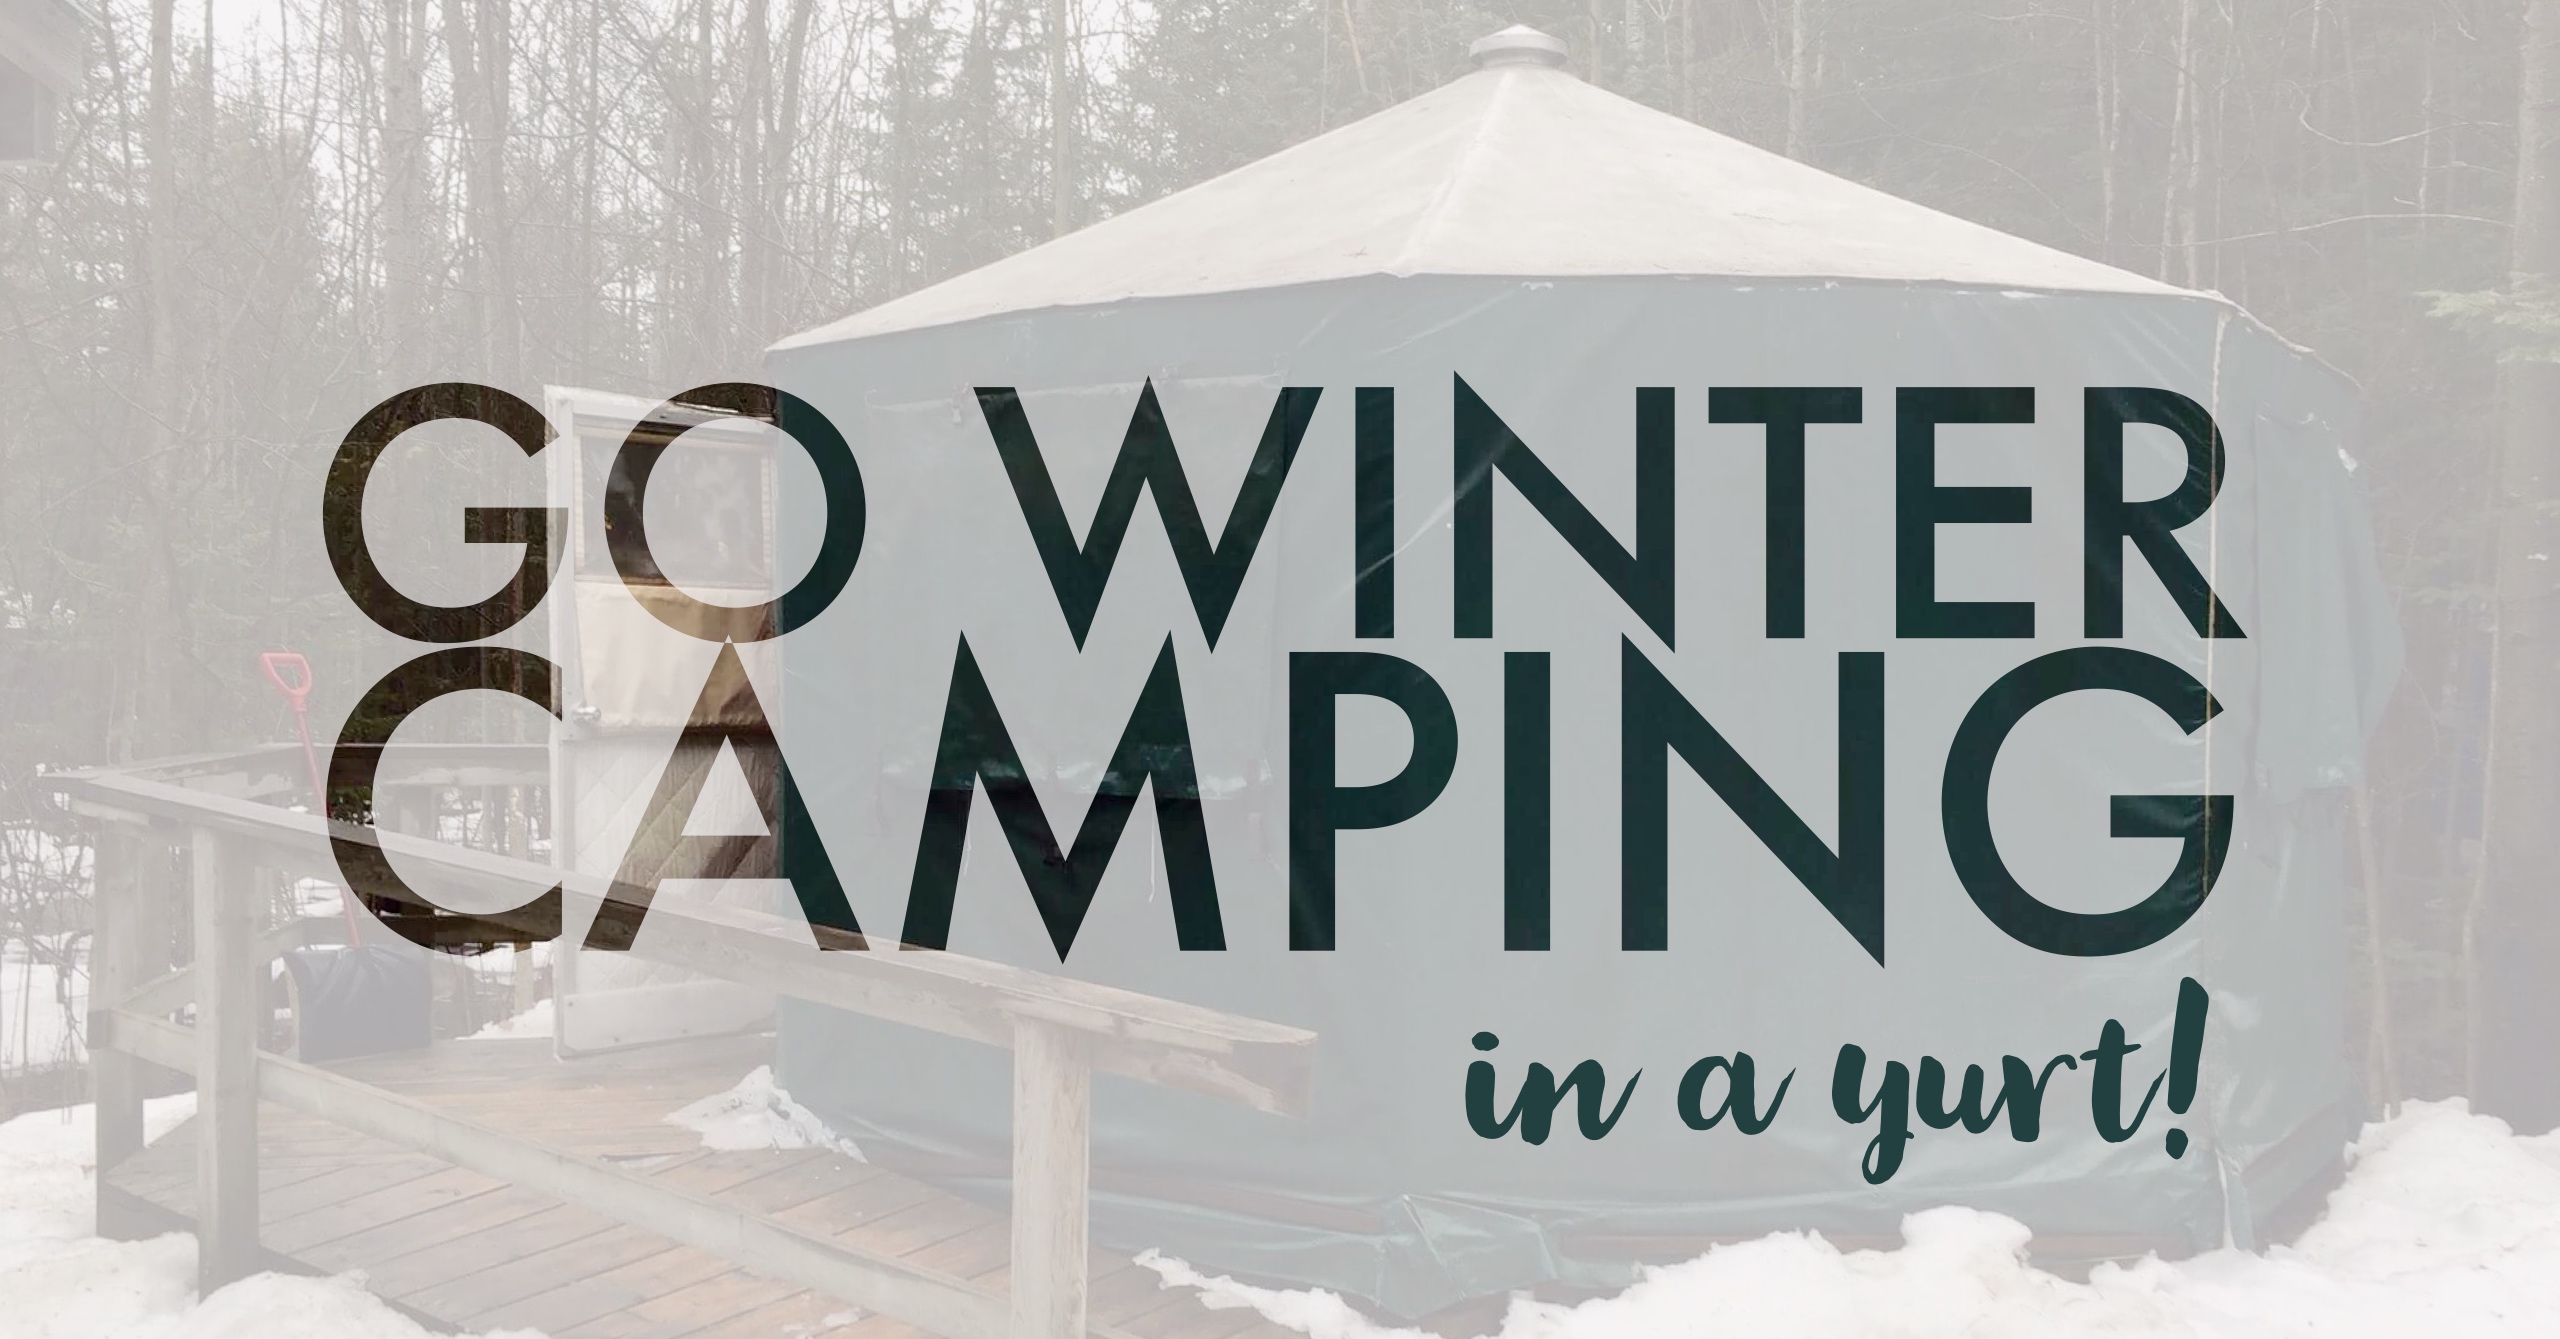 Go winter camping in a yurt | My Wandering Voyage travel blog